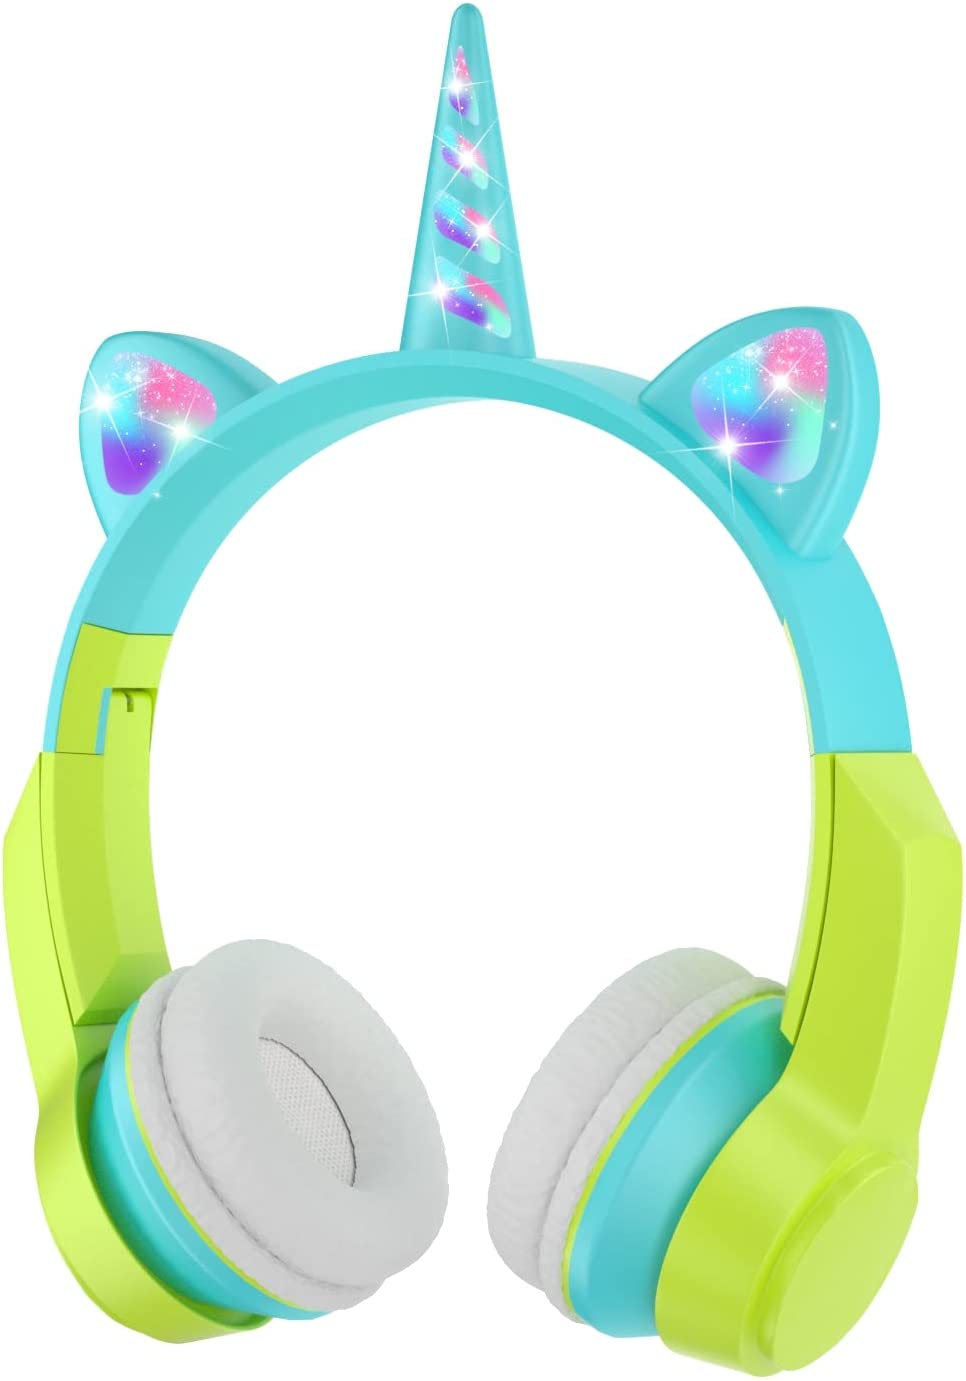 UNICORN Cat Ear Bluetooth Wireless LED Foldable Headphone Headset with Built in Mic and FM Radio for